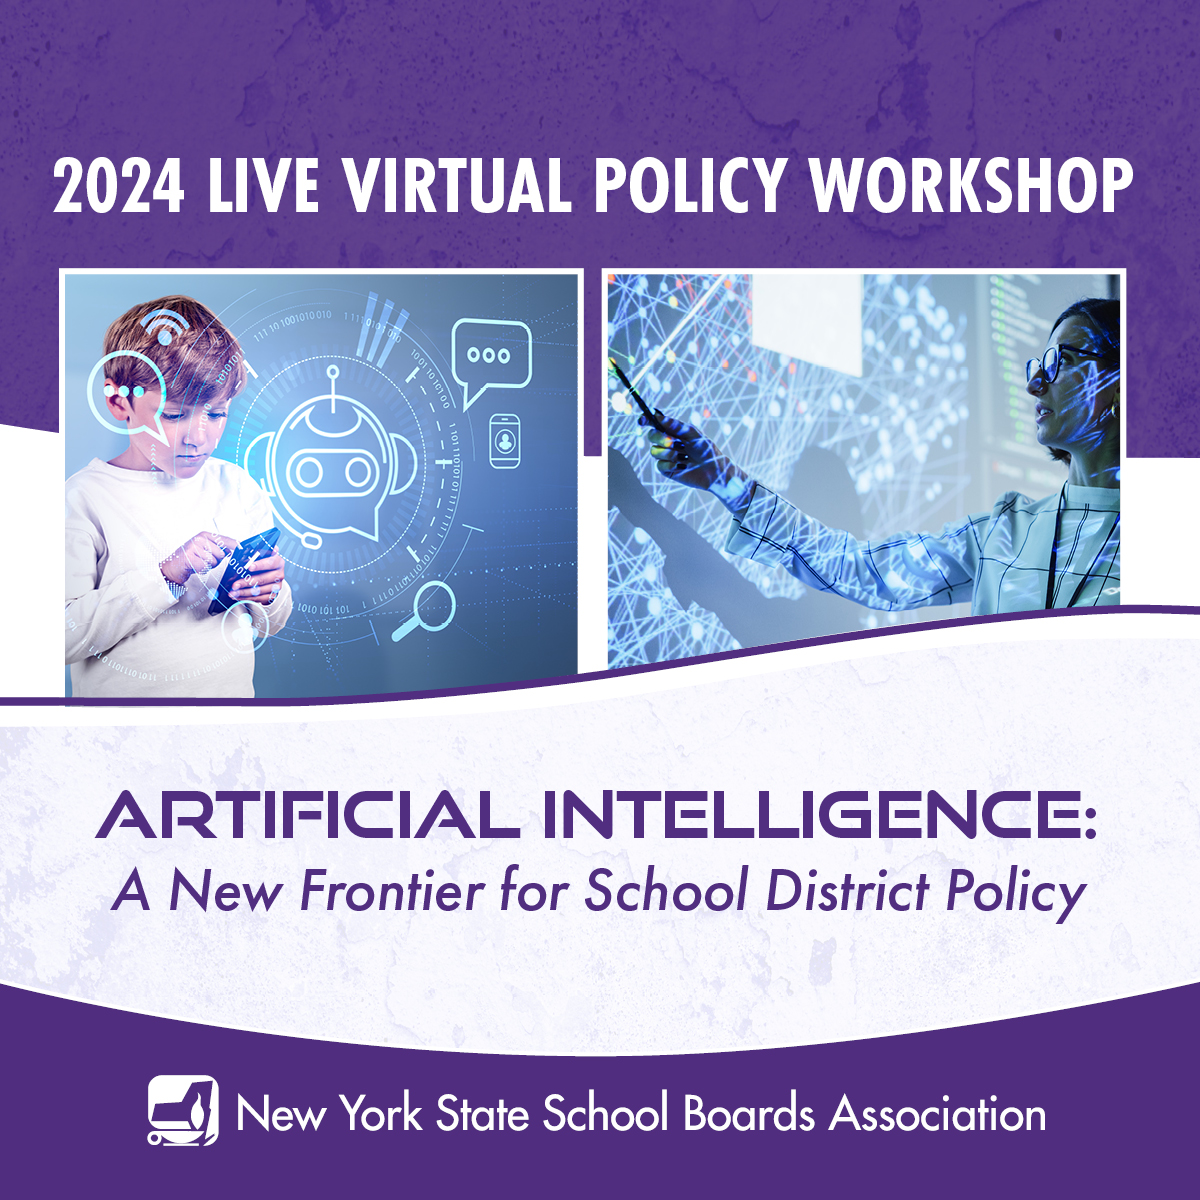 Join us May 8 for our 2024 Live Virtual Policy Workshop and learn how districts should properly write and implement policies on artificial intelligence 🤖💻 Register today! ow.ly/4Fuj50R2zmq